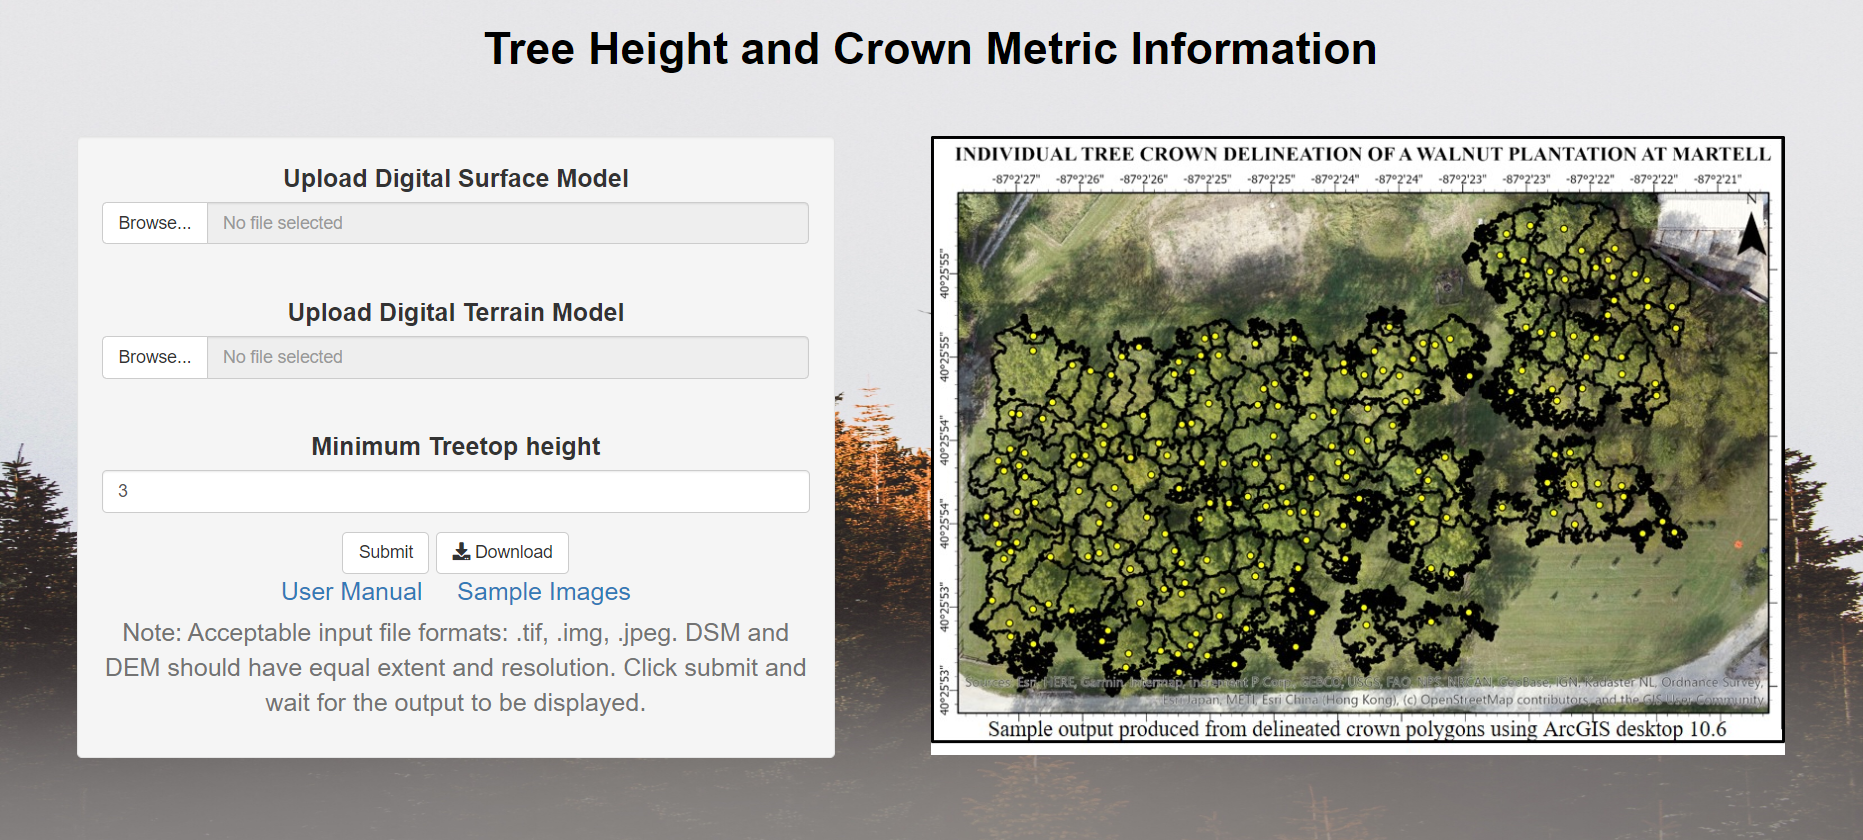 Image of Tree Height and Crown Metric Information